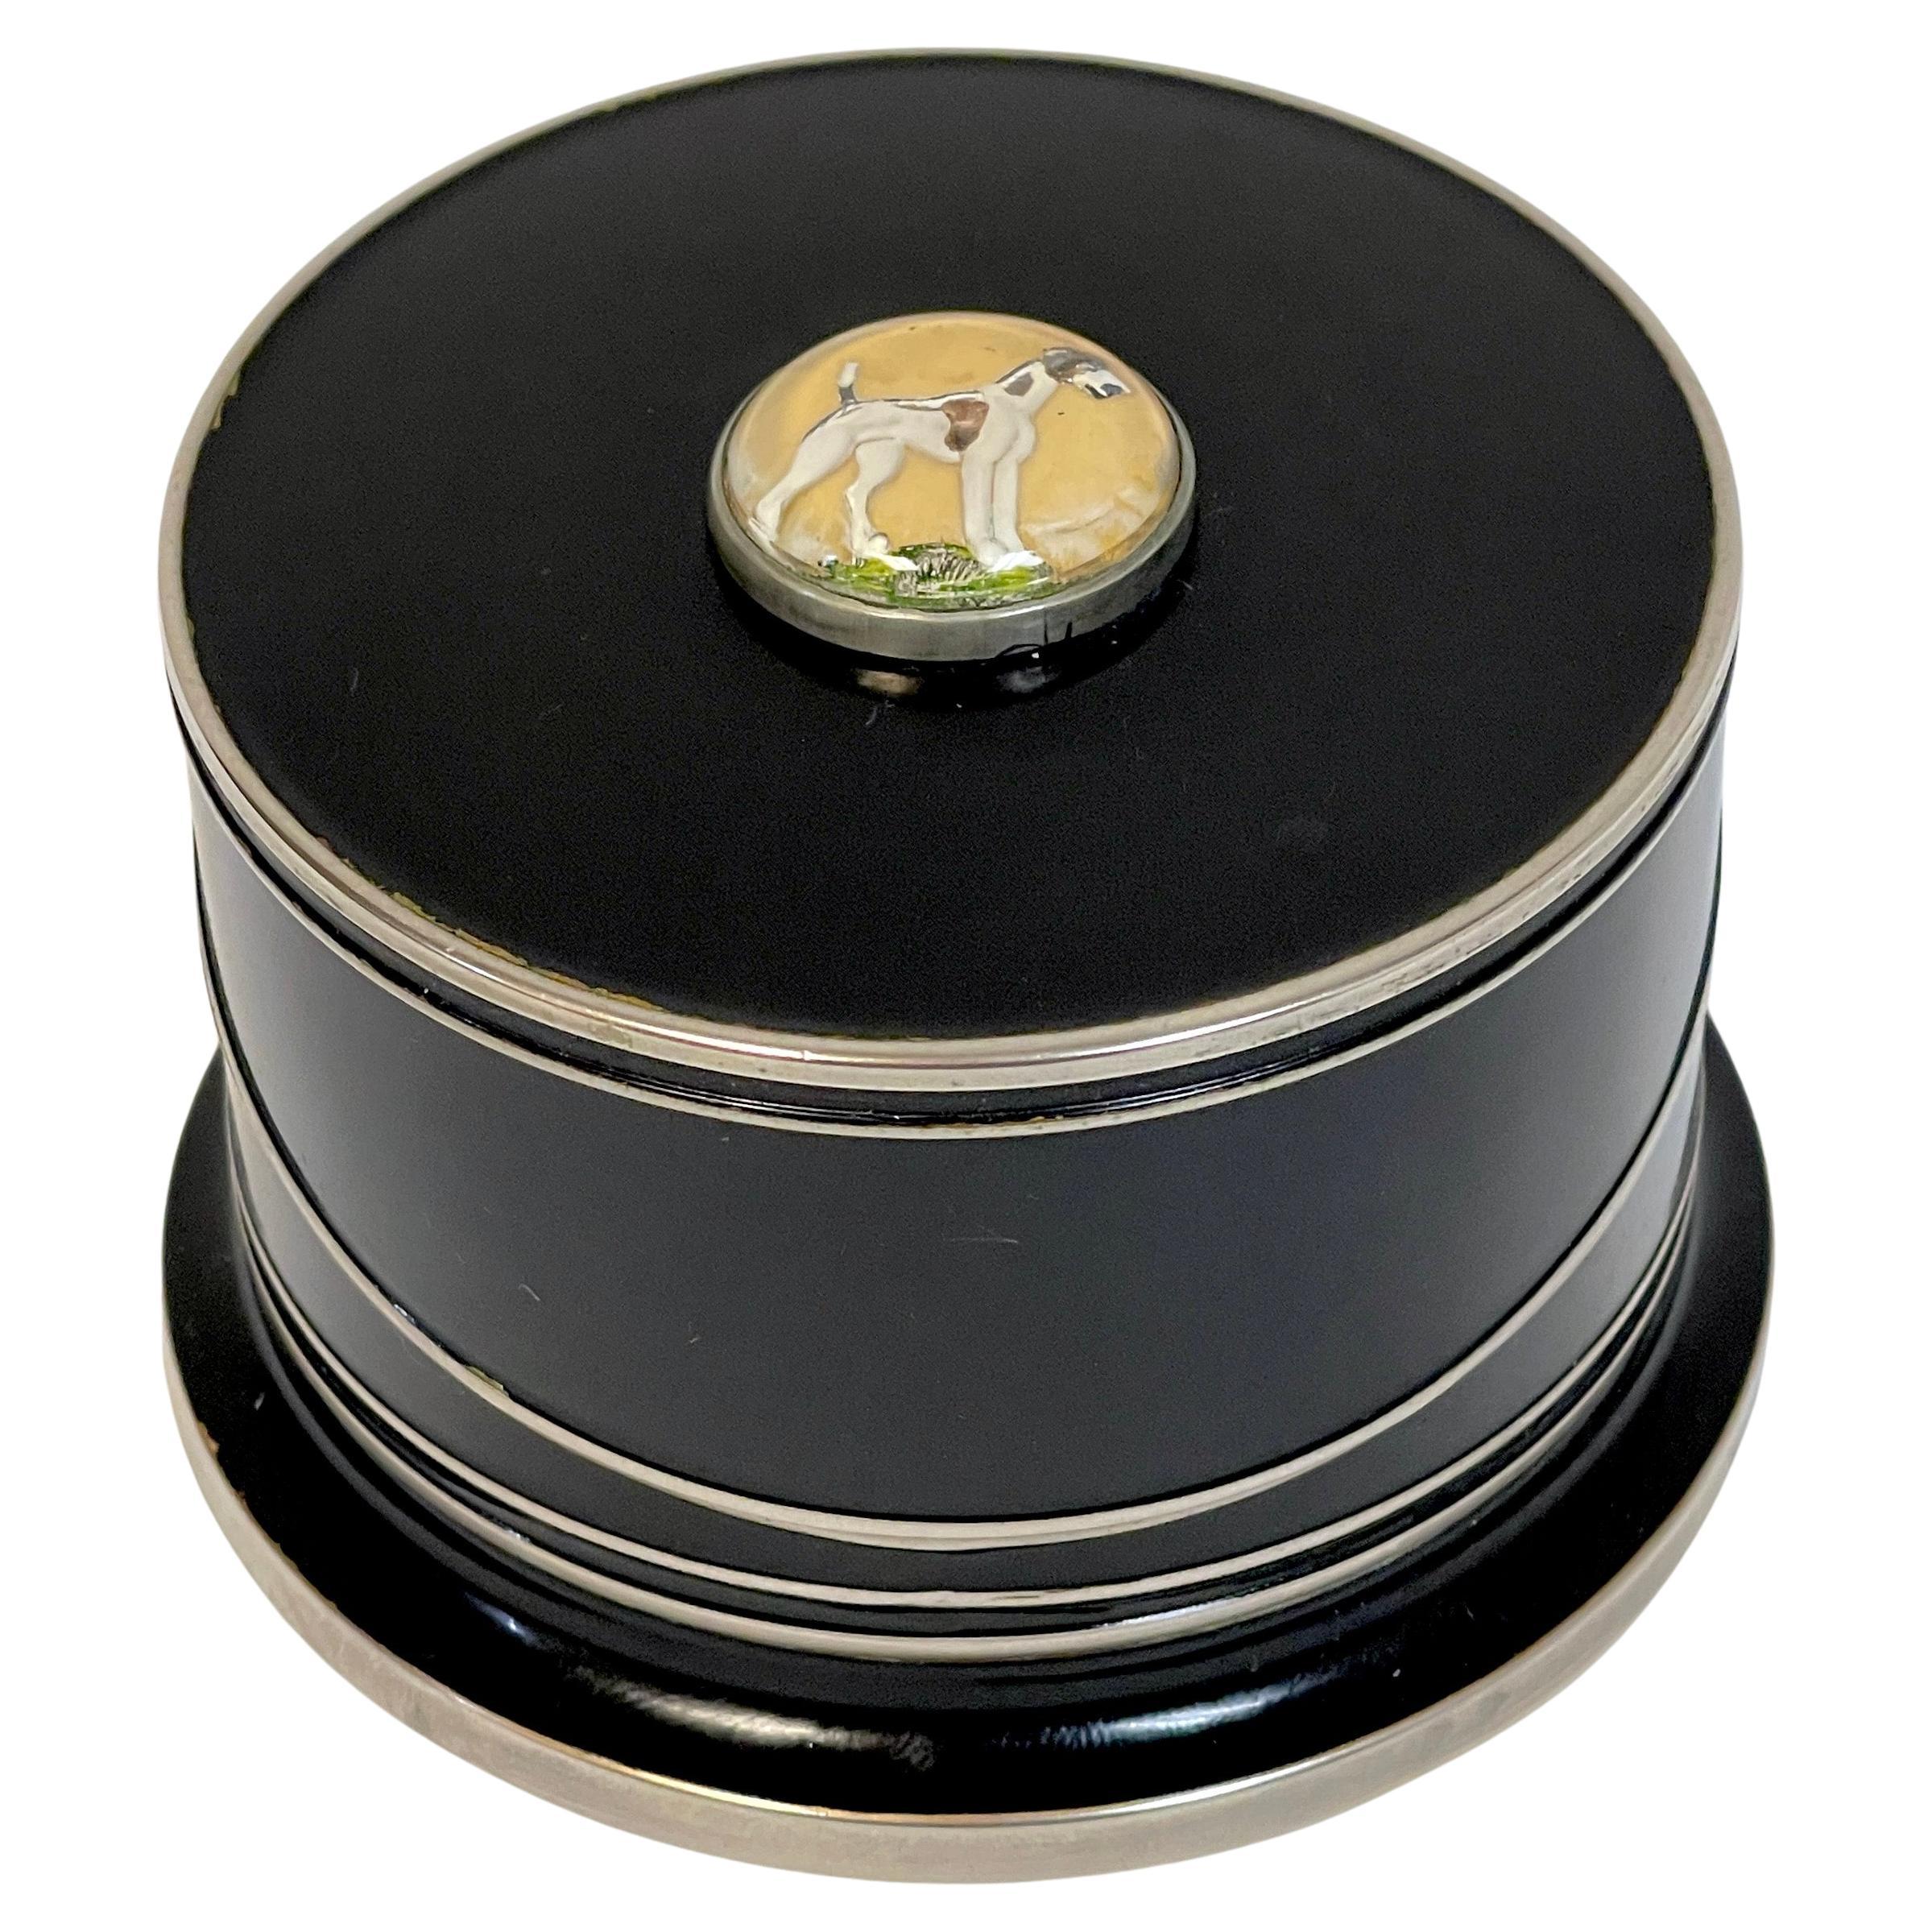 Art Deco Black Enameled & Crystal Dog Intaglio Motif Coaster Box Set 
Germany, circa 1930s 
A unique set of Art Deco useable barware, appearing as a small jewel like round black enameled box with a reverse painted intaglio of Terrirer type of dog.